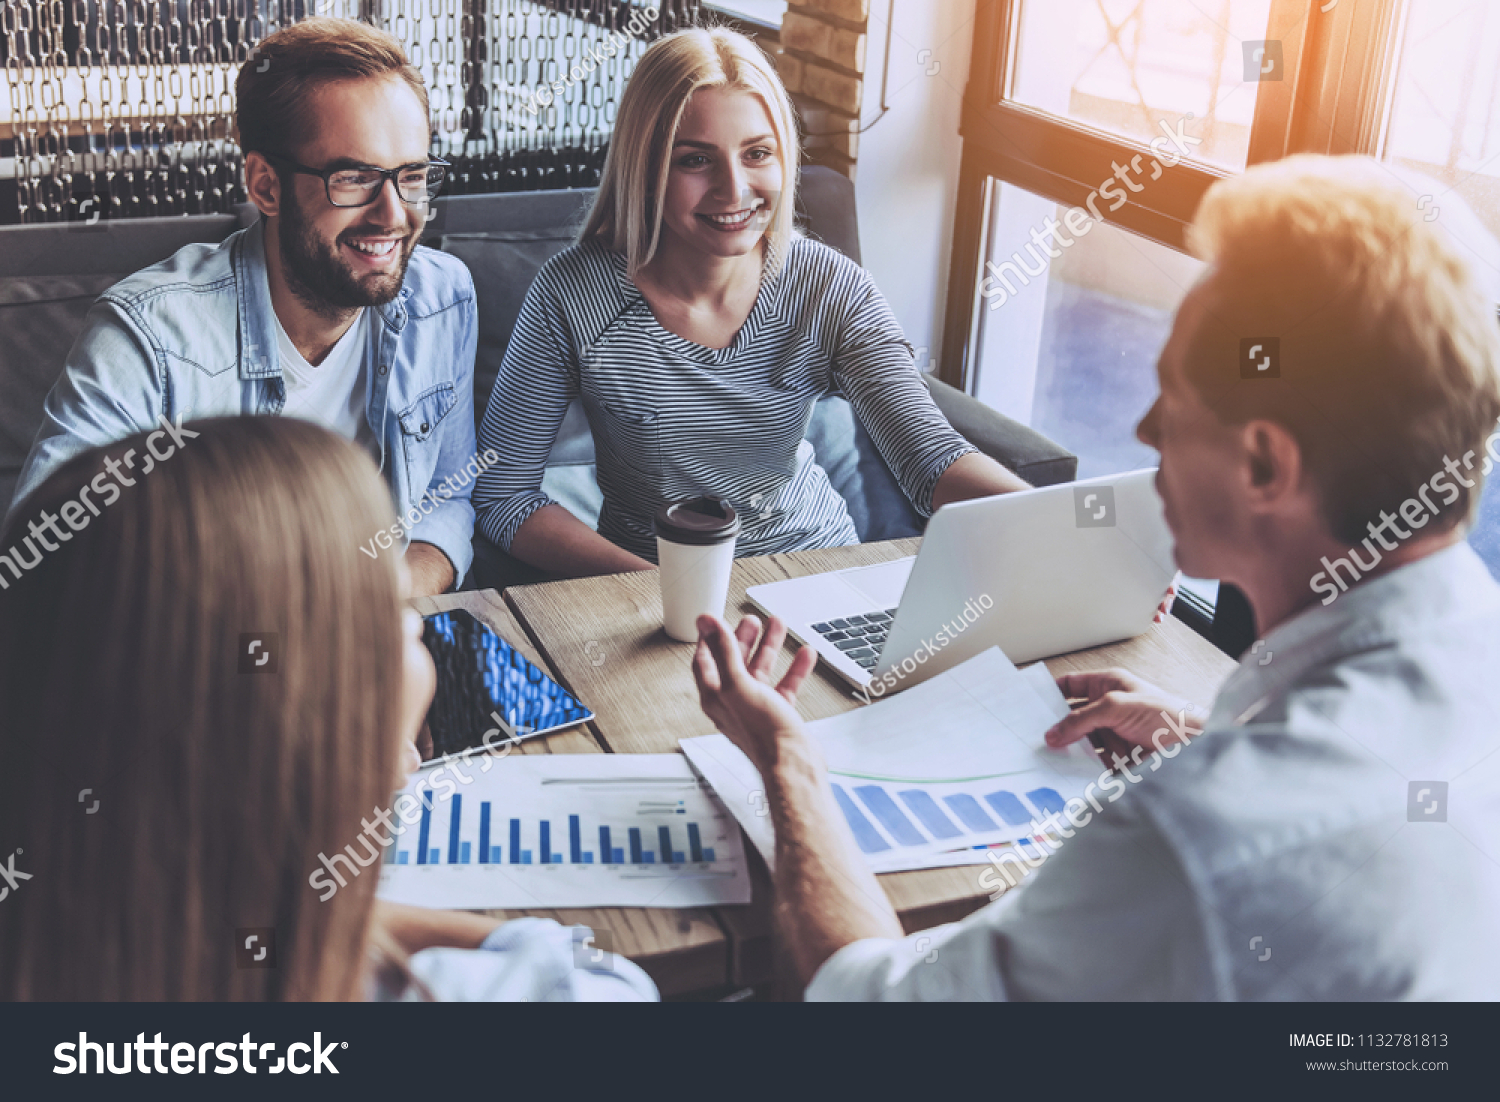 Business People in Casual Wear Discussing Affairs. Four Smart Colleagues Using Laptop and Drinking Coffee. They Have Discuss Hard Project. Professional relationships Concept. Modern Free Workplace. #1132781813